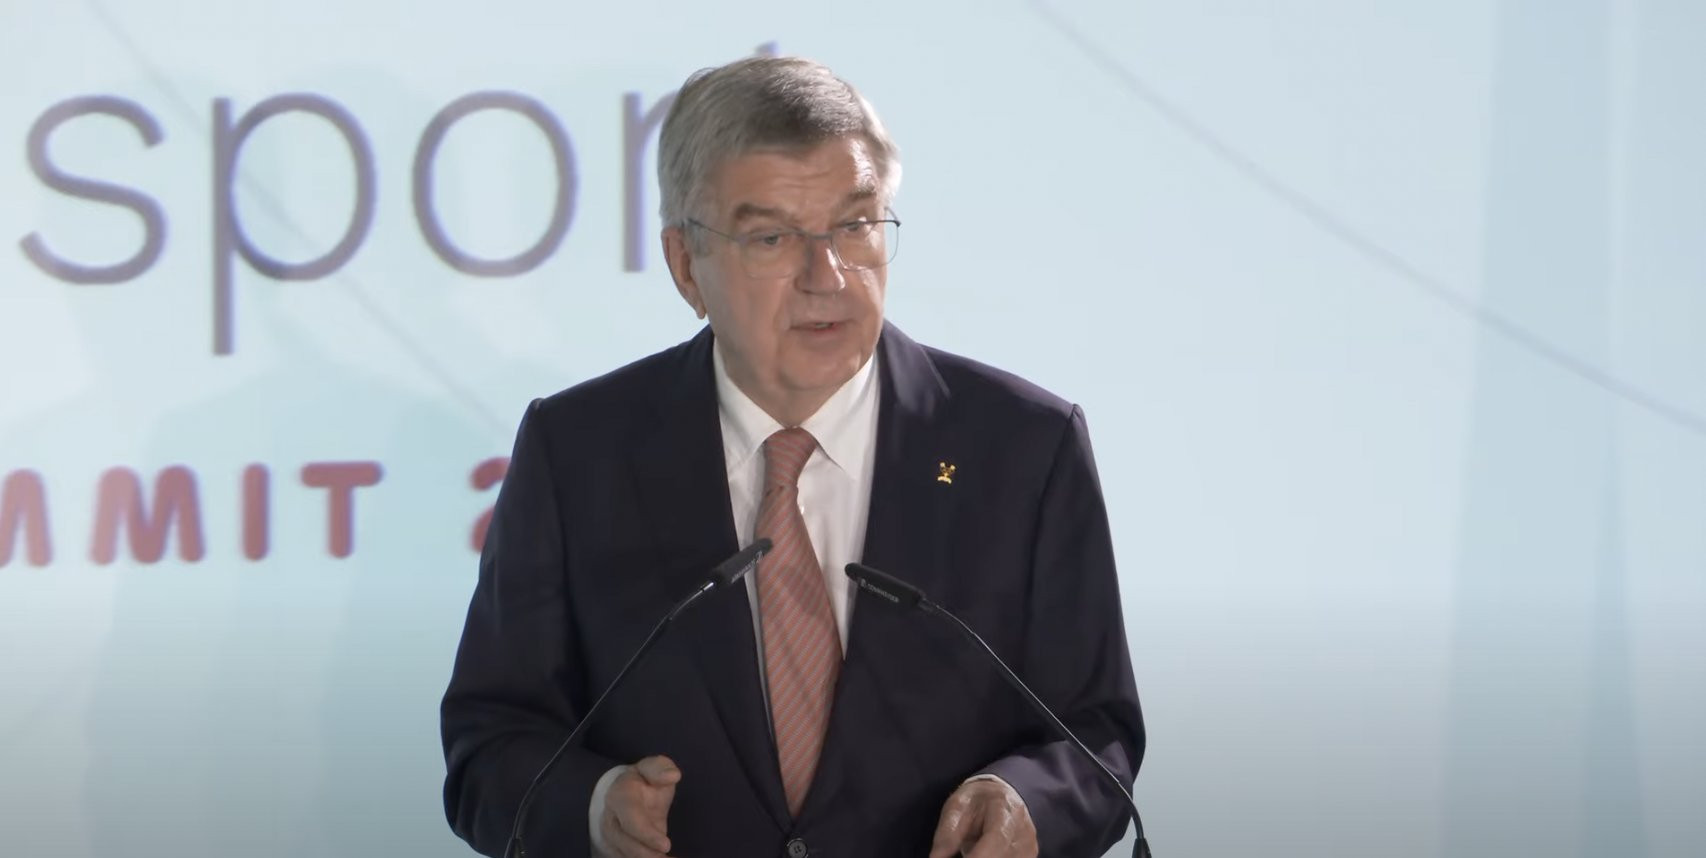 IOC President Thomas Bach opened the smartcities & sport summit ©smartcities & sport